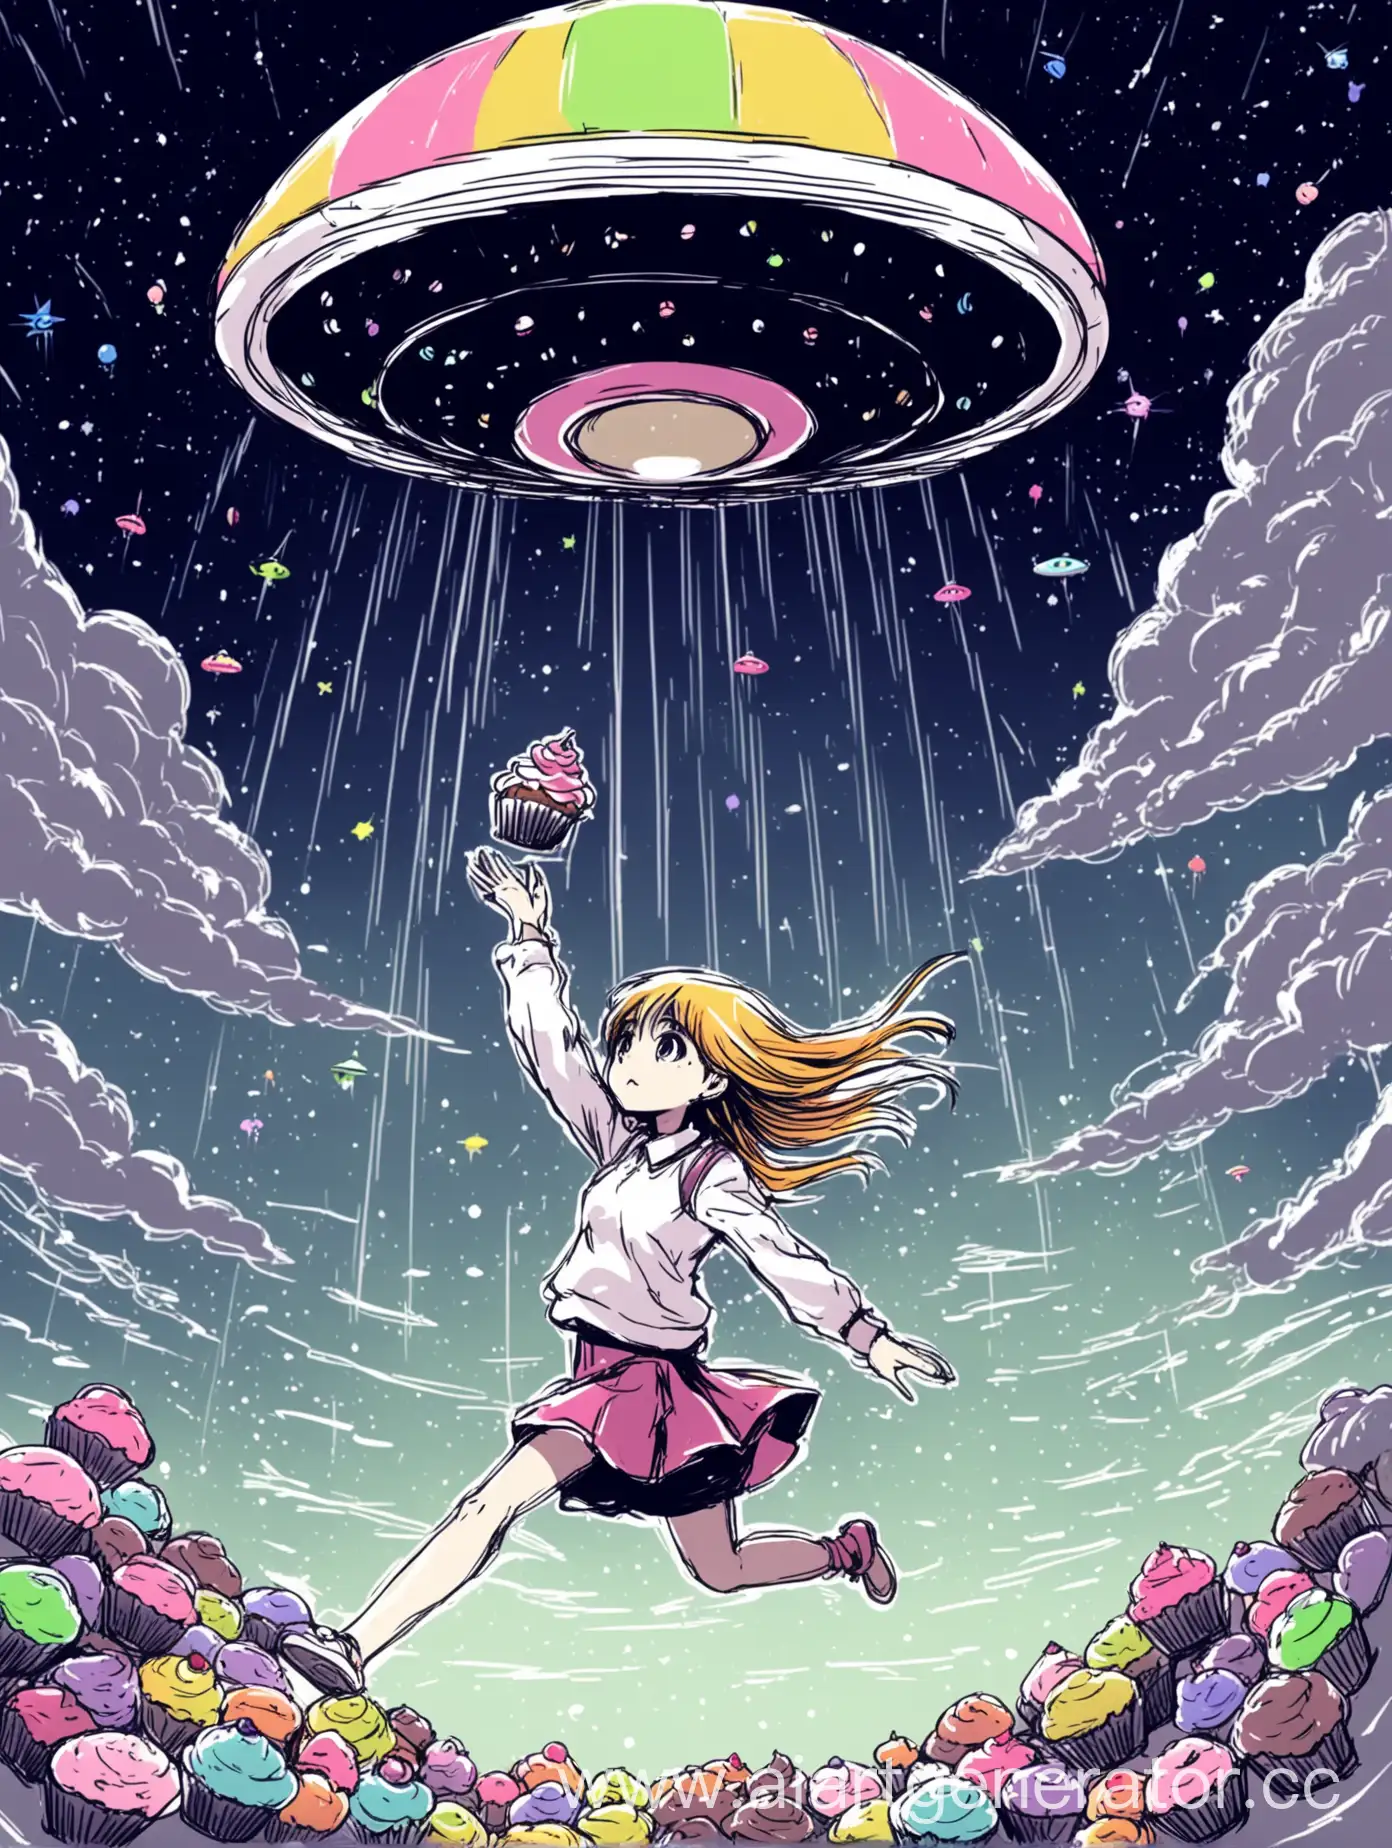 Anime-Girl-Reaching-for-Cupcake-with-UFO-Intervention